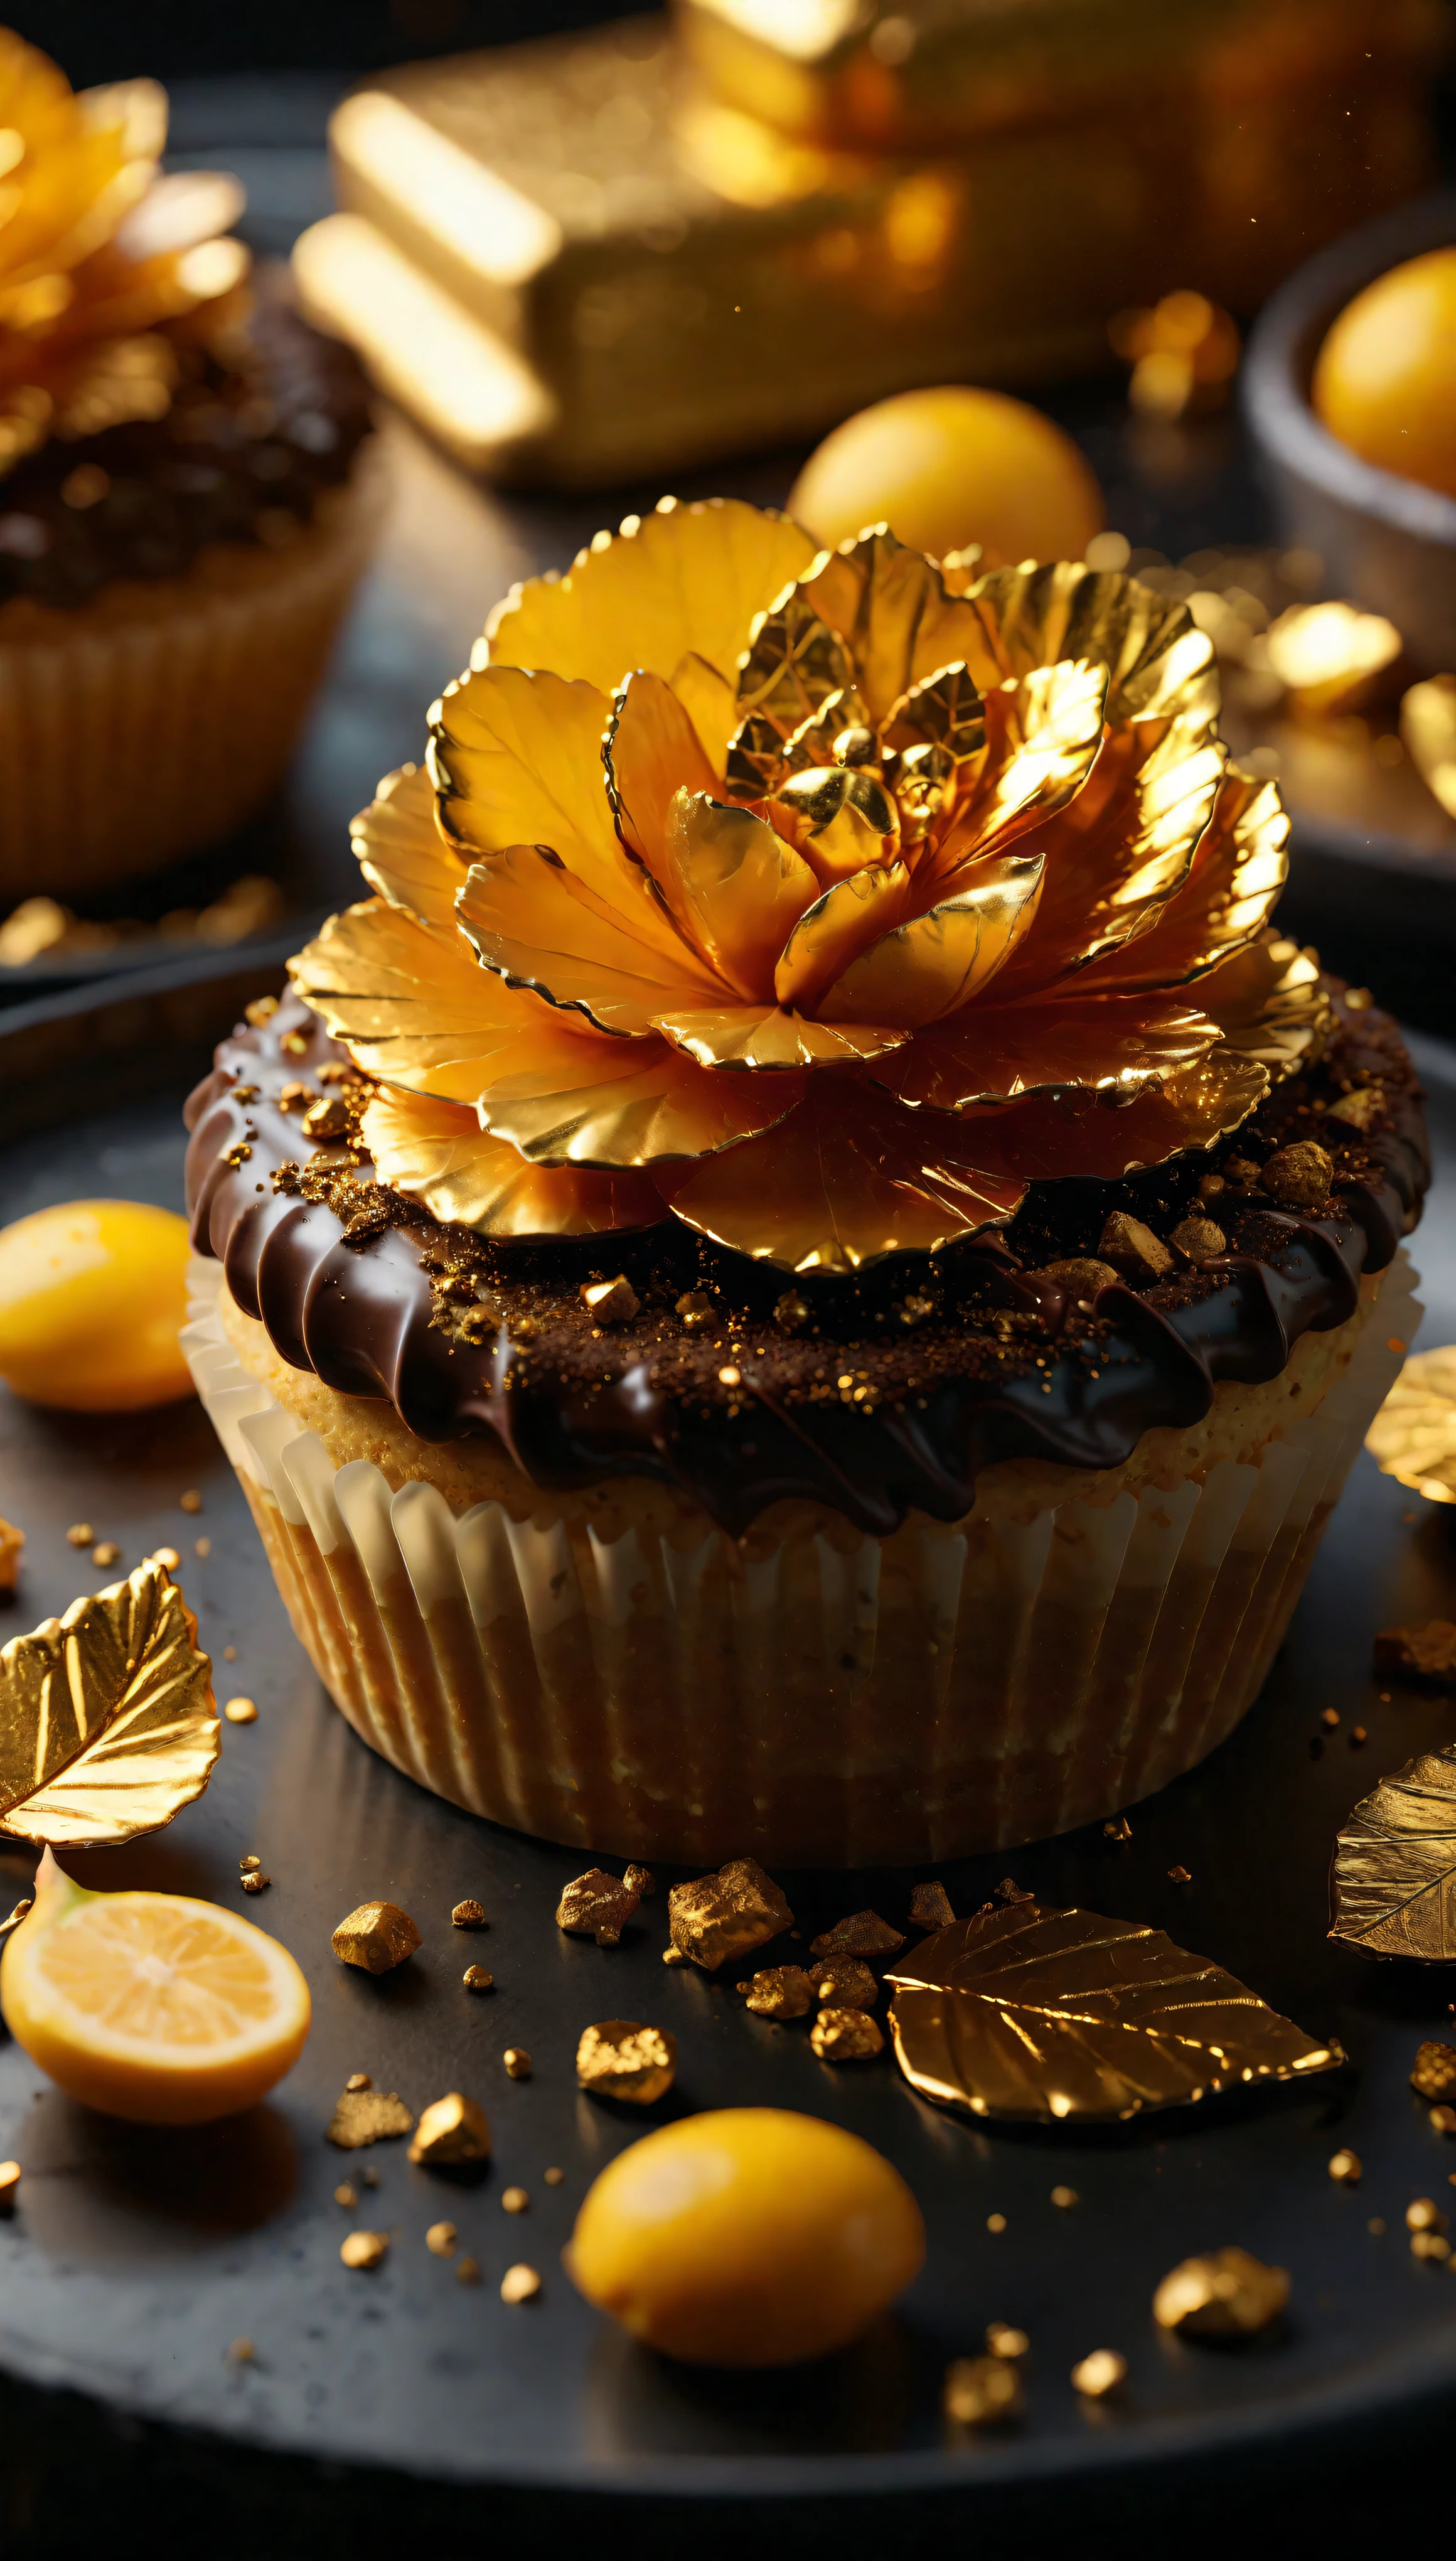 ((Masterpiece in maximum 16K resolution):1.6),((soft_color_photograpy:)1.5), ((Ultra-Detailed):1.4),((Movie-like still images and dynamic angles):1.3). | (Macro shot cinematic photo of delightful dessert with micro gold leaf), (edible micro gold leaf), (focus on the dessert), (macro lens), (exotic cuisines), (Candles), (luminous object), (delightful atmosphere), (shimmer), (aesthetic dessert accesories), (visual experience),(Realism), (Realistic),award-winning graphics, dark shot, film grain, extremely detailed, Digital Art, rtx, Unreal Engine, scene concept anti glare effect, All captured with sharp focus. | Rendered in ultra-high definition with UHD and retina quality, this masterpiece ensures anatomical correctness and textured skin with super detail. With a focus on high quality and accuracy, this award-winning portrayal captures every nuance in stunning 16k resolution, immersing viewers in its lifelike depiction. | ((perfect_composition, perfect_design, perfect_layout, perfect_detail, ultra_detailed)), ((enhance_all, fix_everything)), More Detail, Enhance.